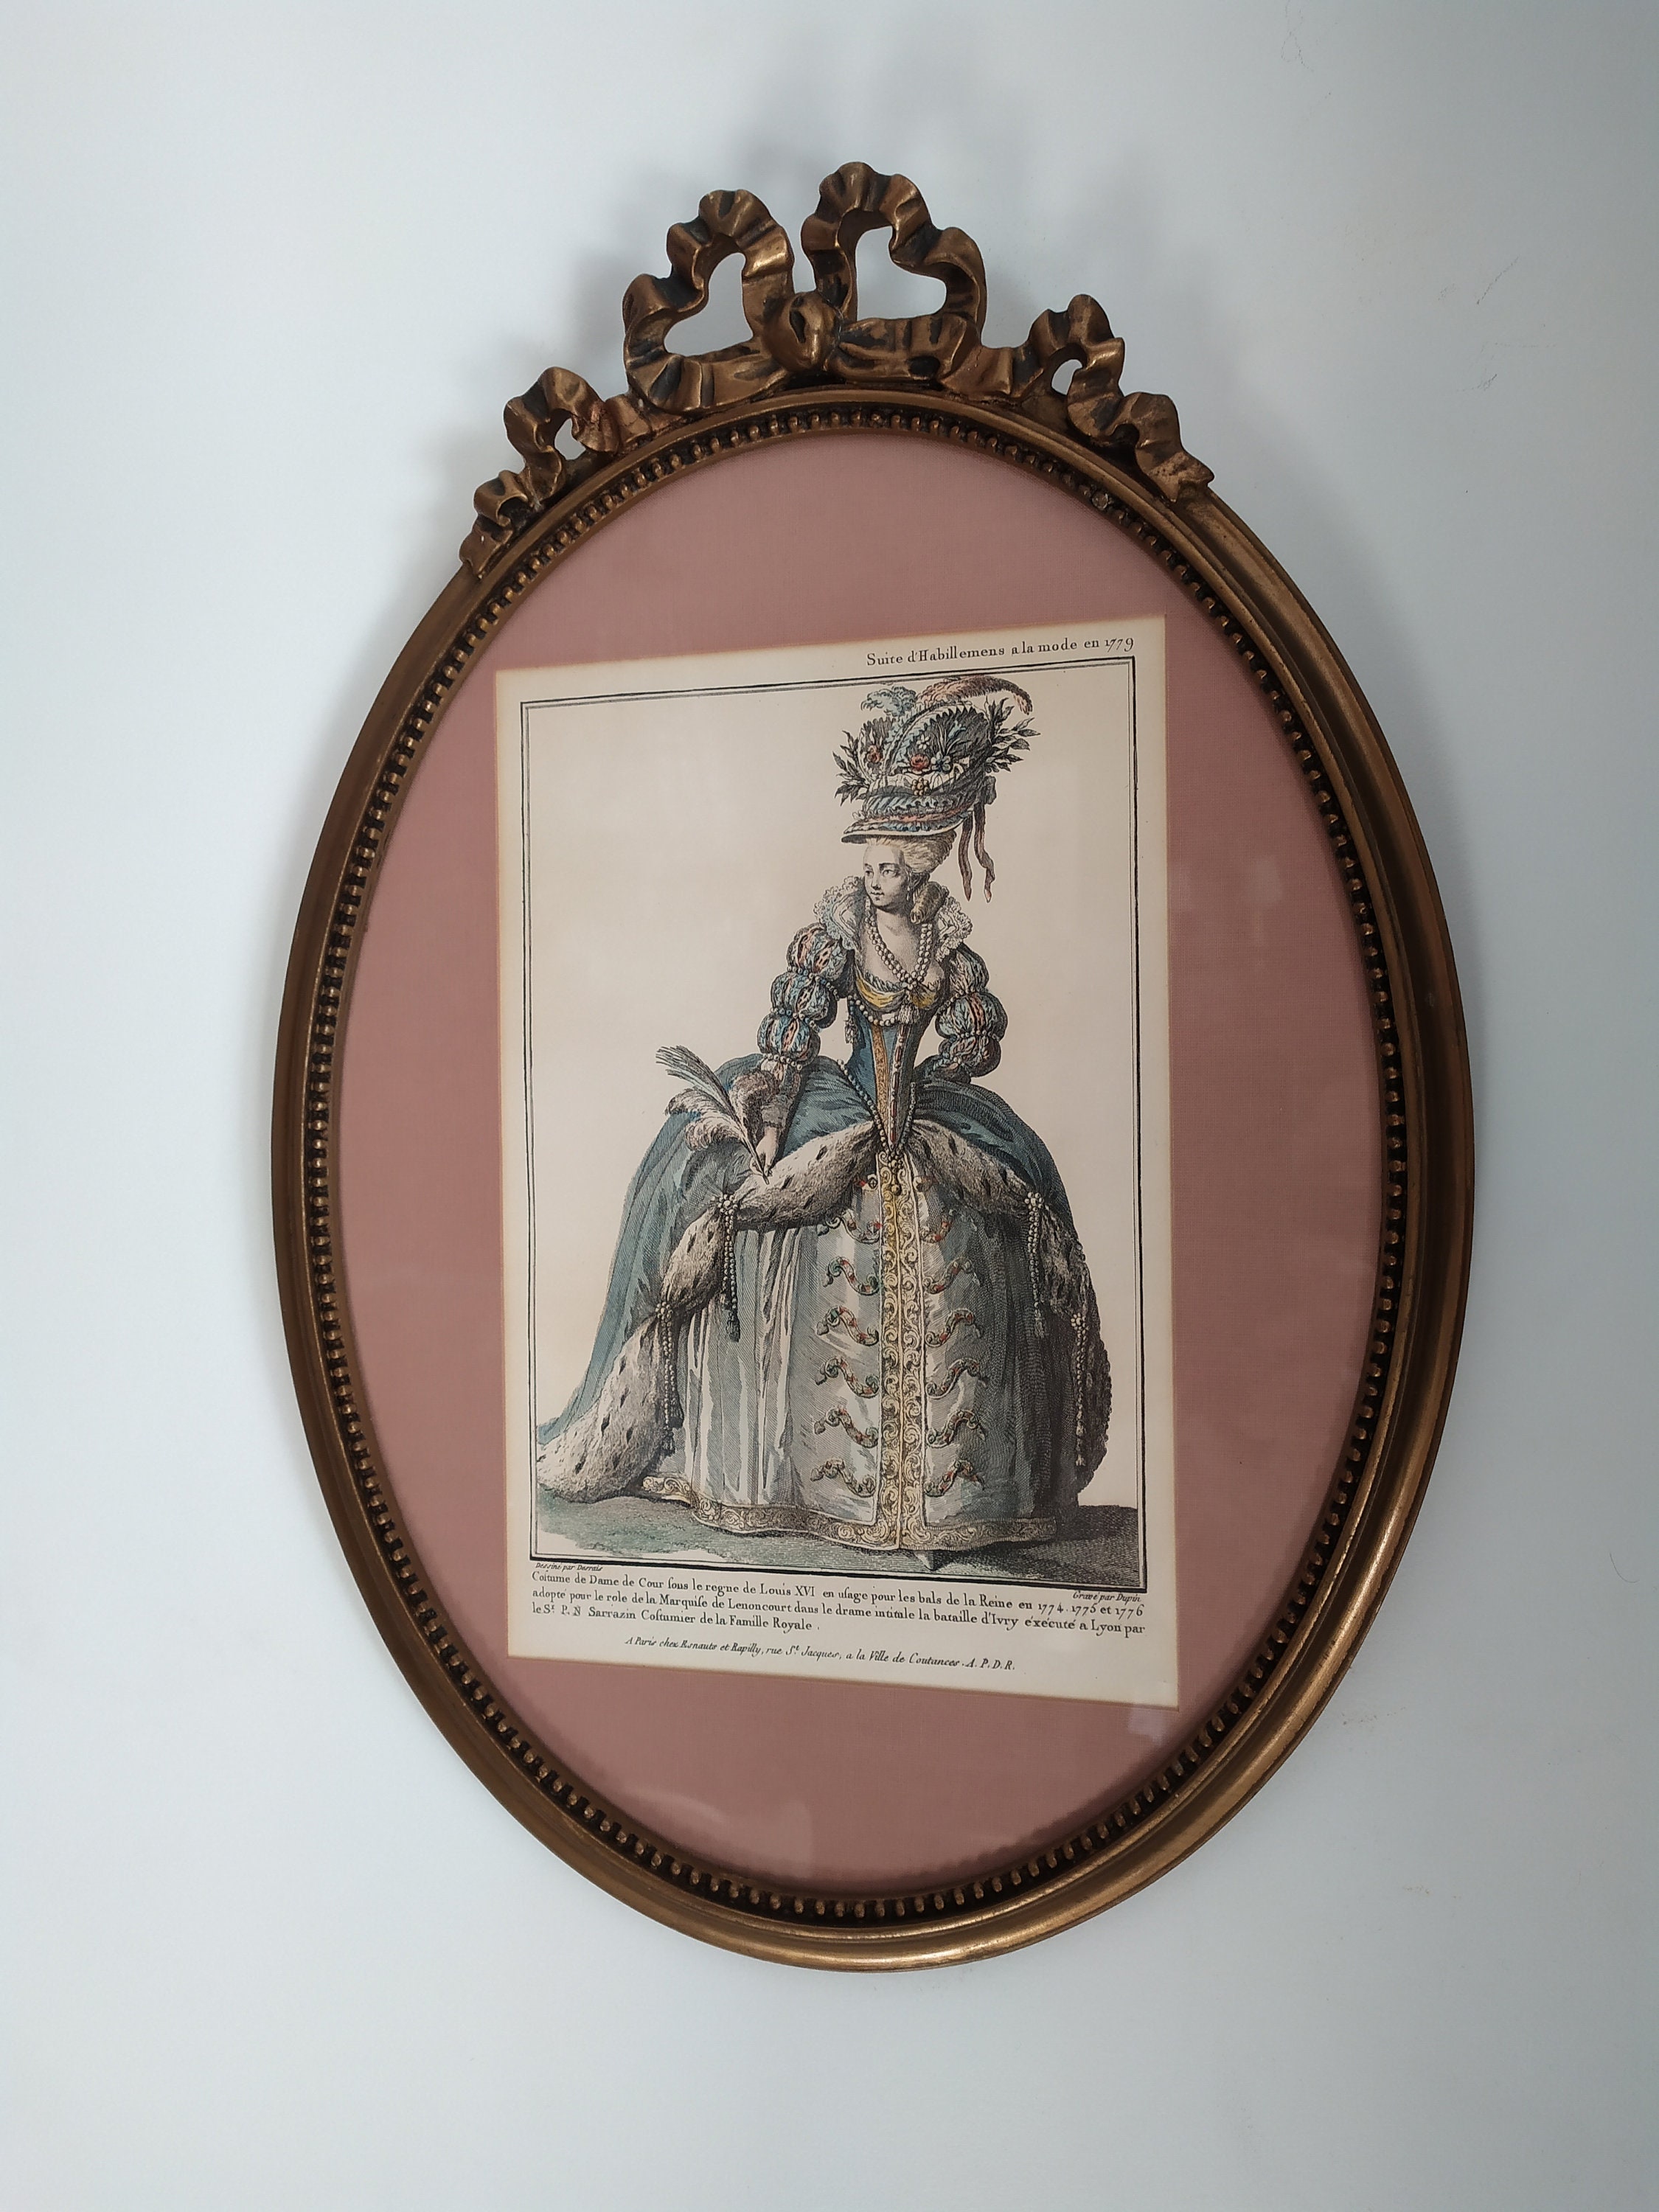 King Louis XVI of France, in winter costume 1776 with